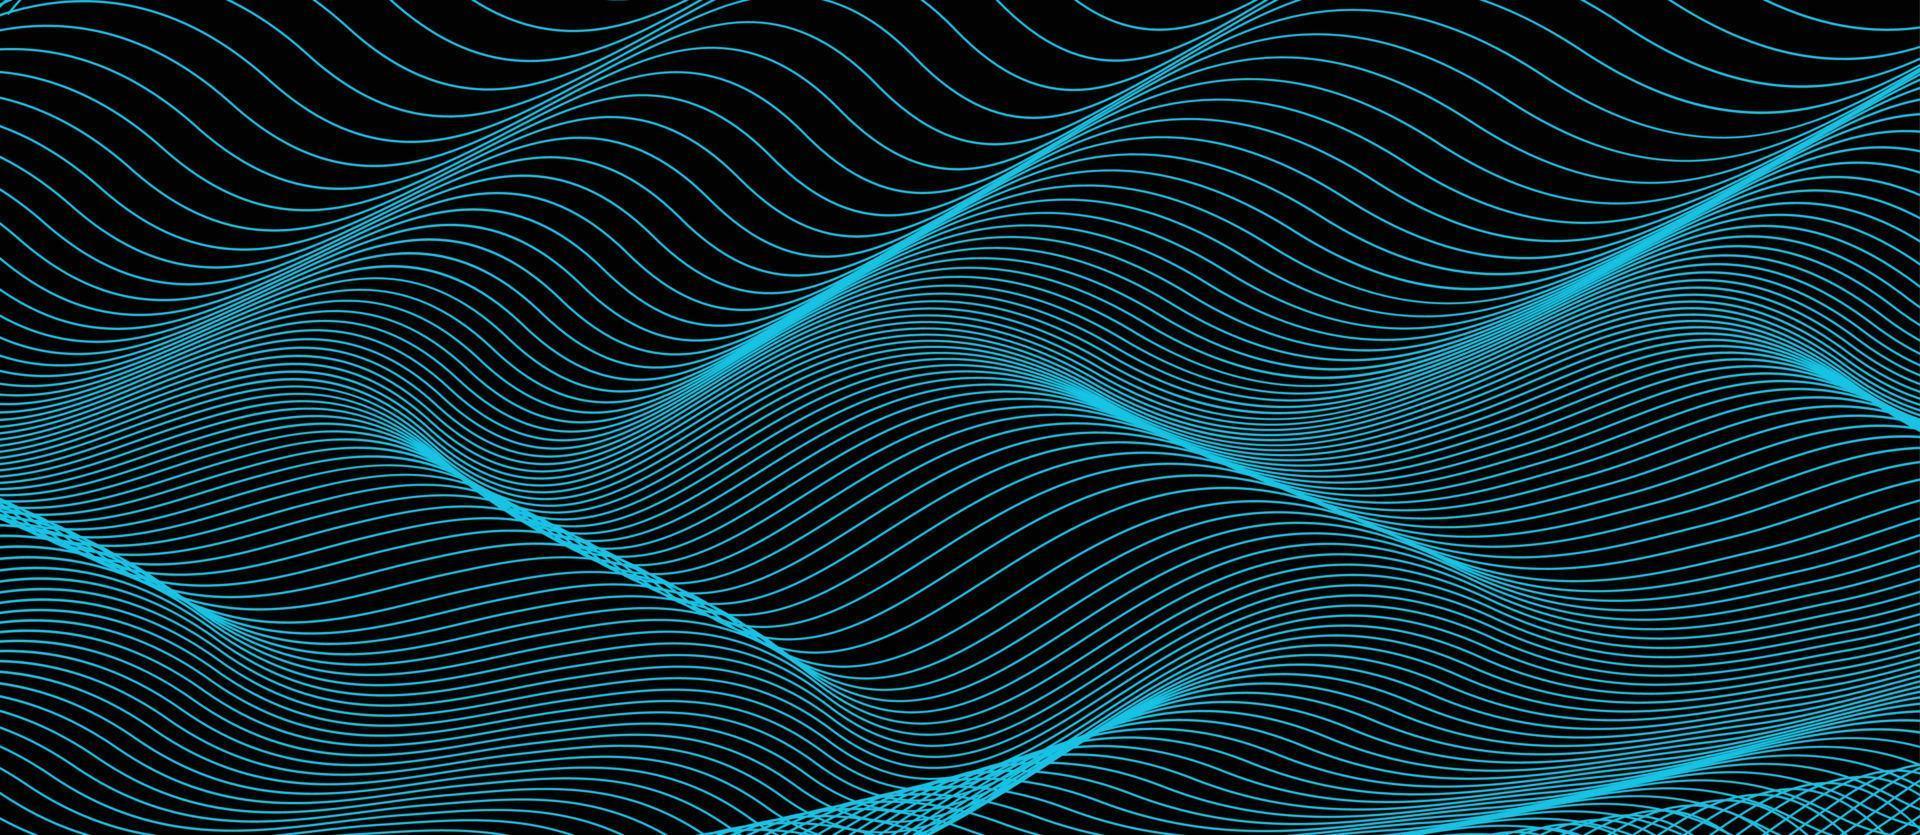 Abstract dark teal background with light wave. Blurred turquoise water backdrop. Vector illustration for your graphic design